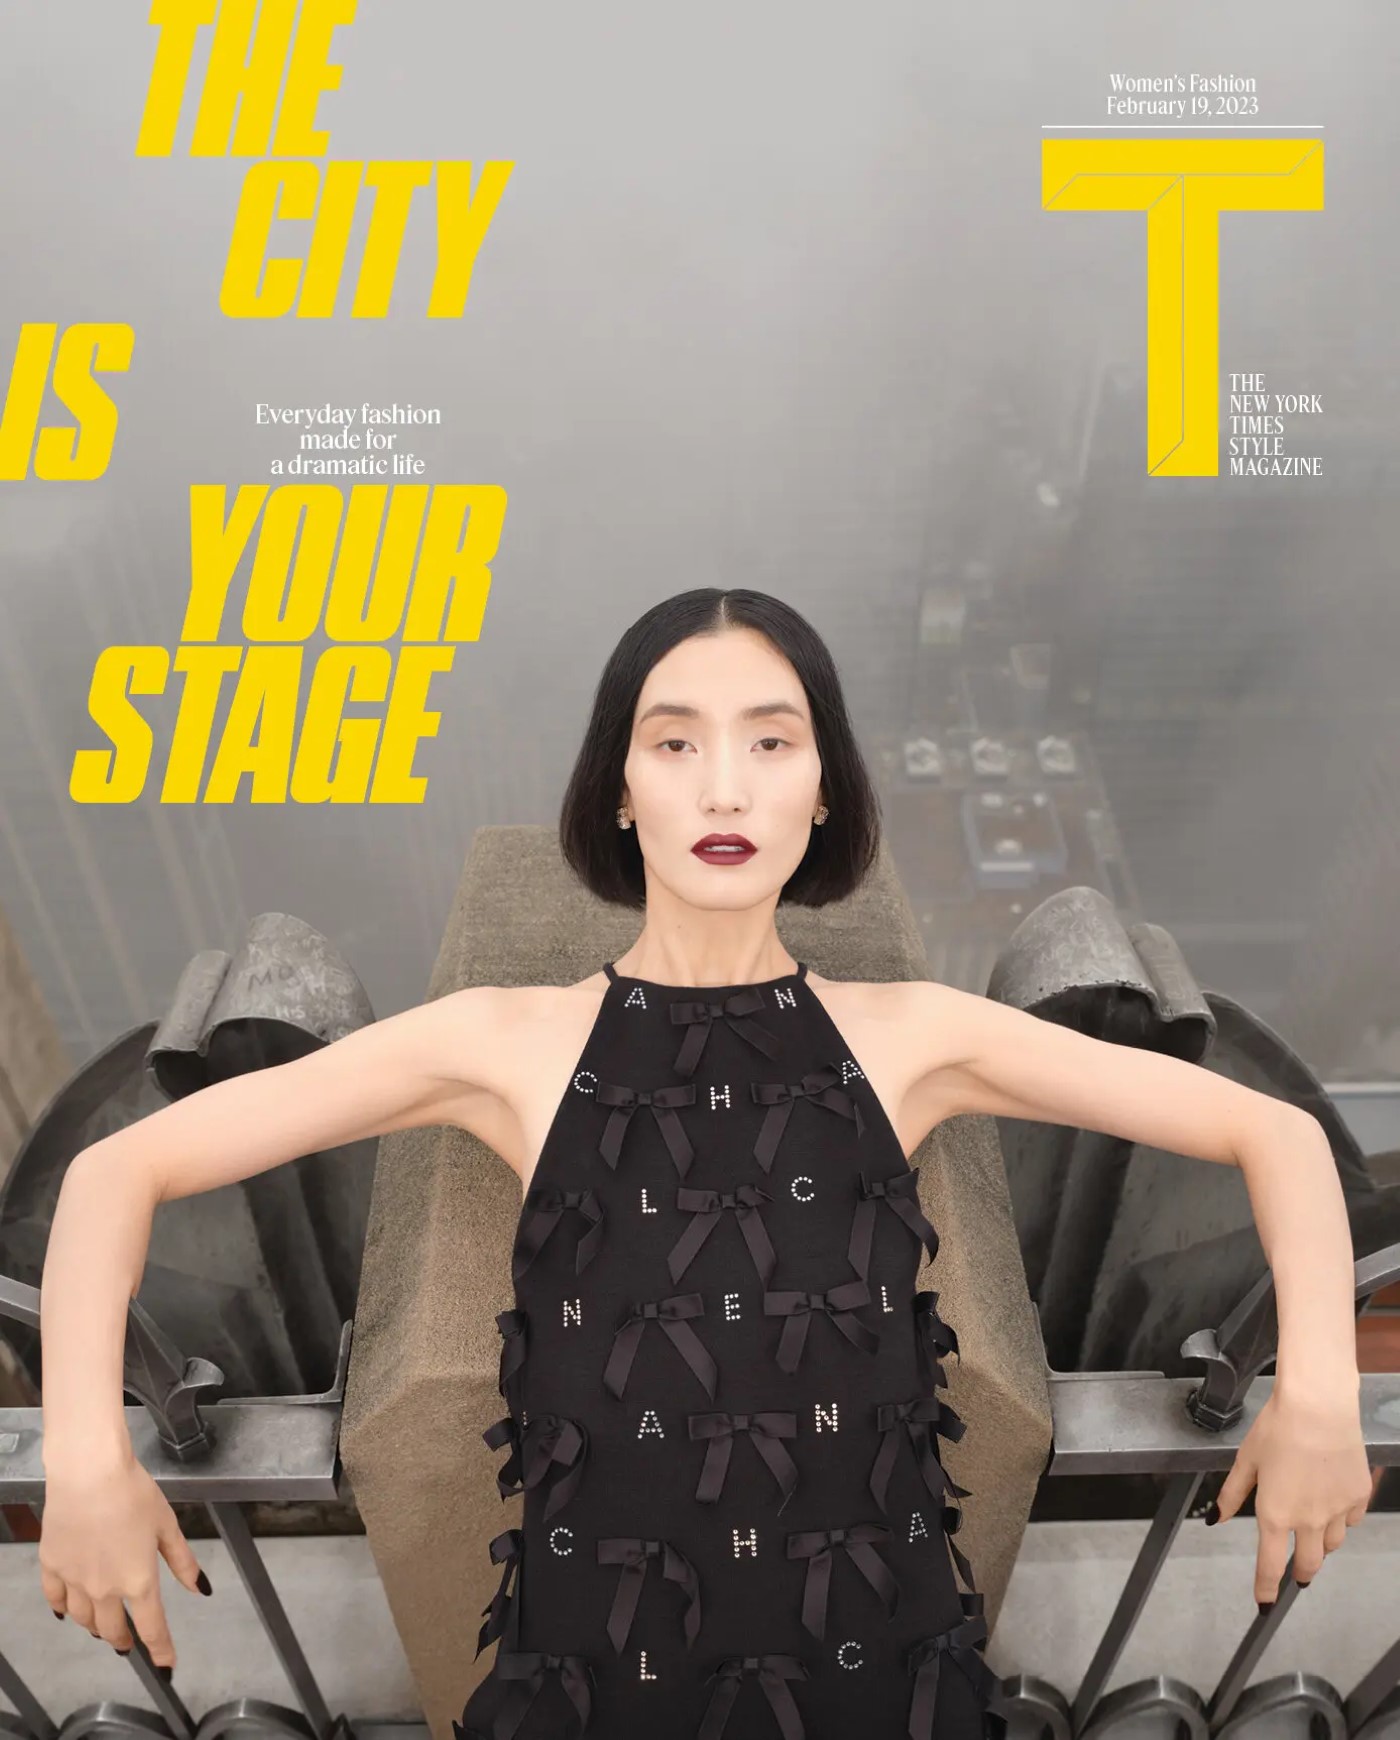 T Magazine February 2023 covers by Johnny Dufort